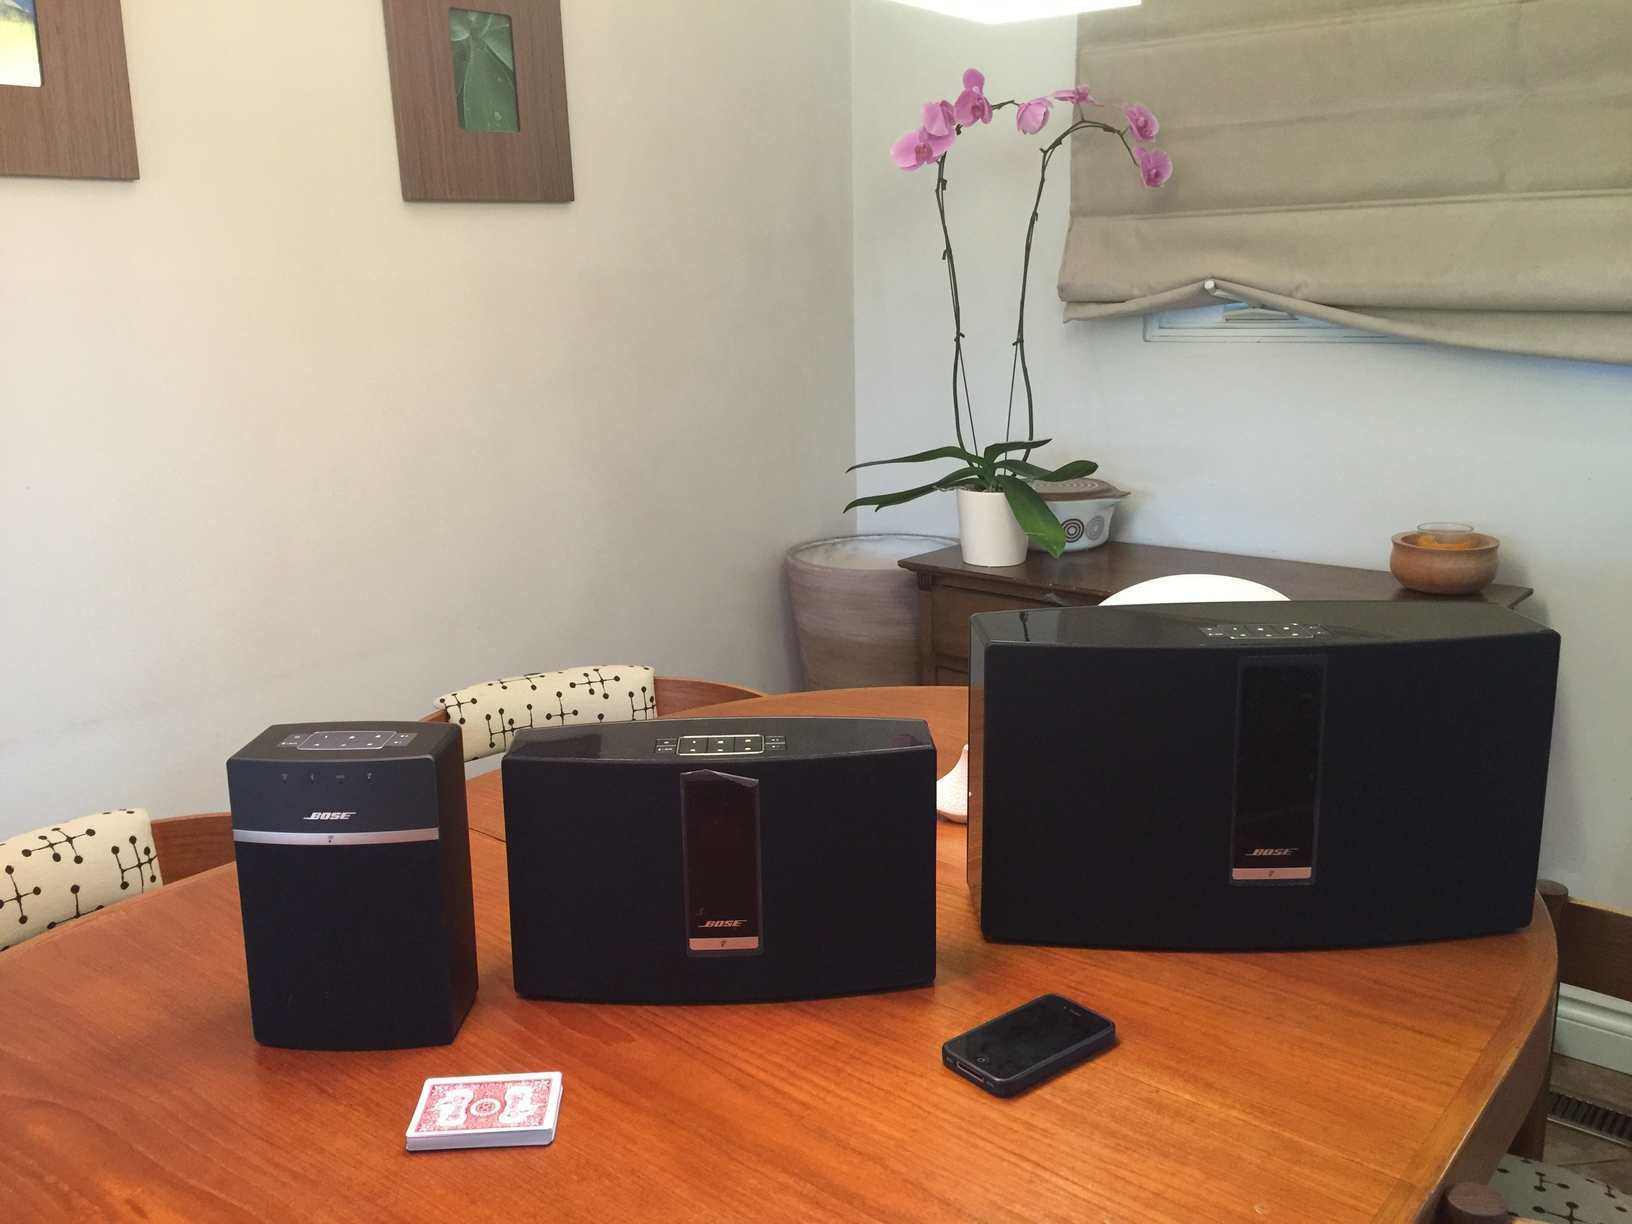 Mechanics betrayal Glossary Bose Soundtouch series: Reviewing the Soundtouch 10, 20 and 30